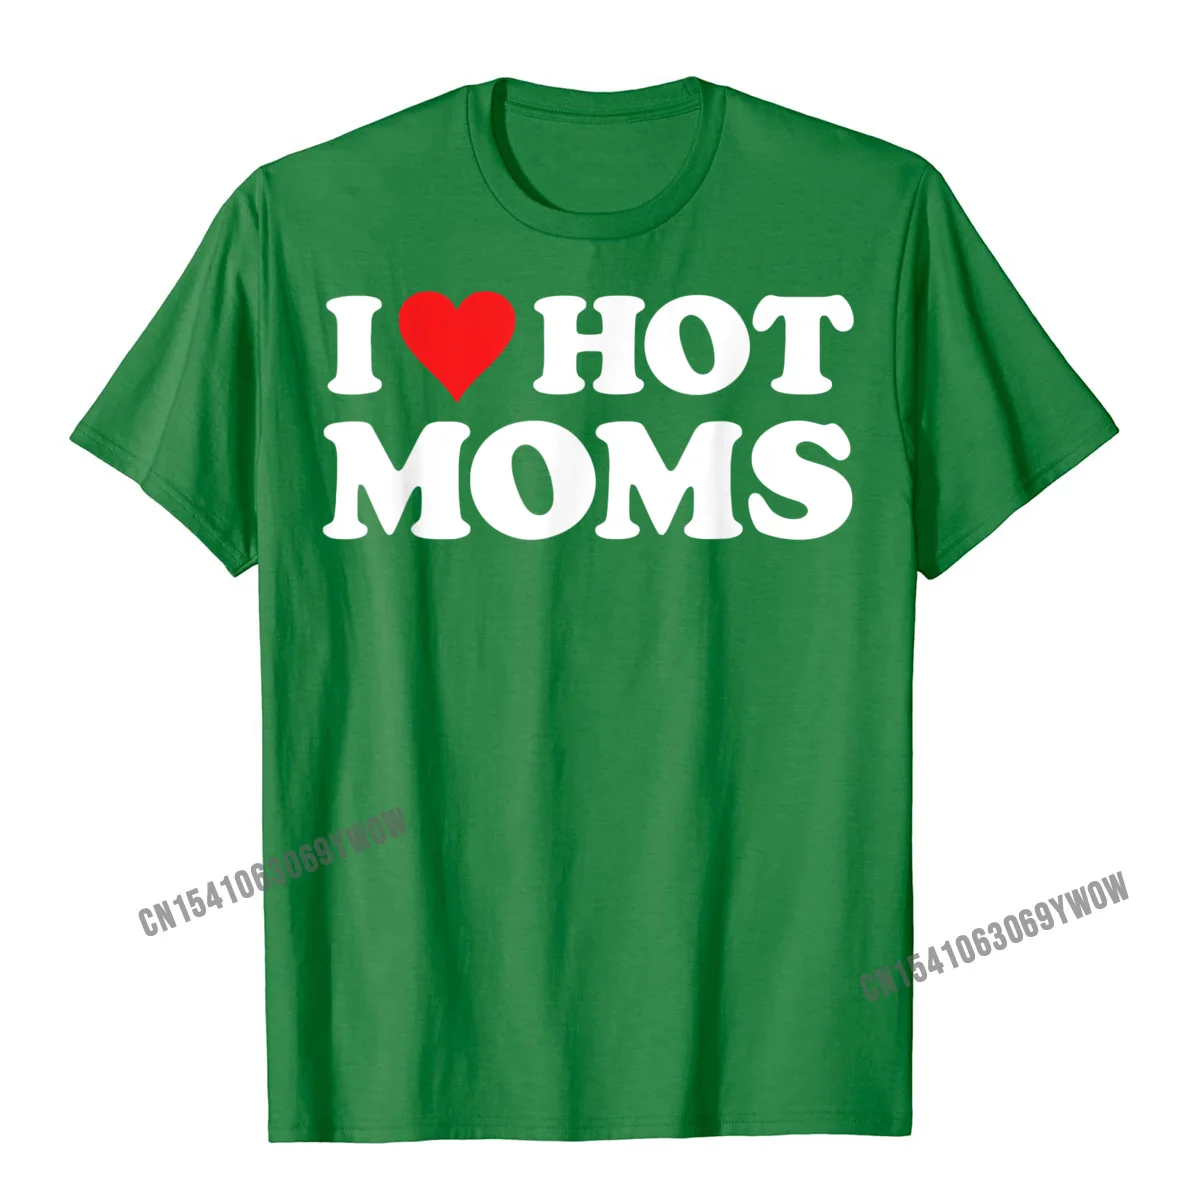 Design Fitted Men Top T-shirts Round Neck Short Sleeve Cotton Tops Shirt Slim Fit Tops Tees Drop Shipping I Love Hot Moms Tshirt Funny Red Heart Love Moms T-Shirt__653 green